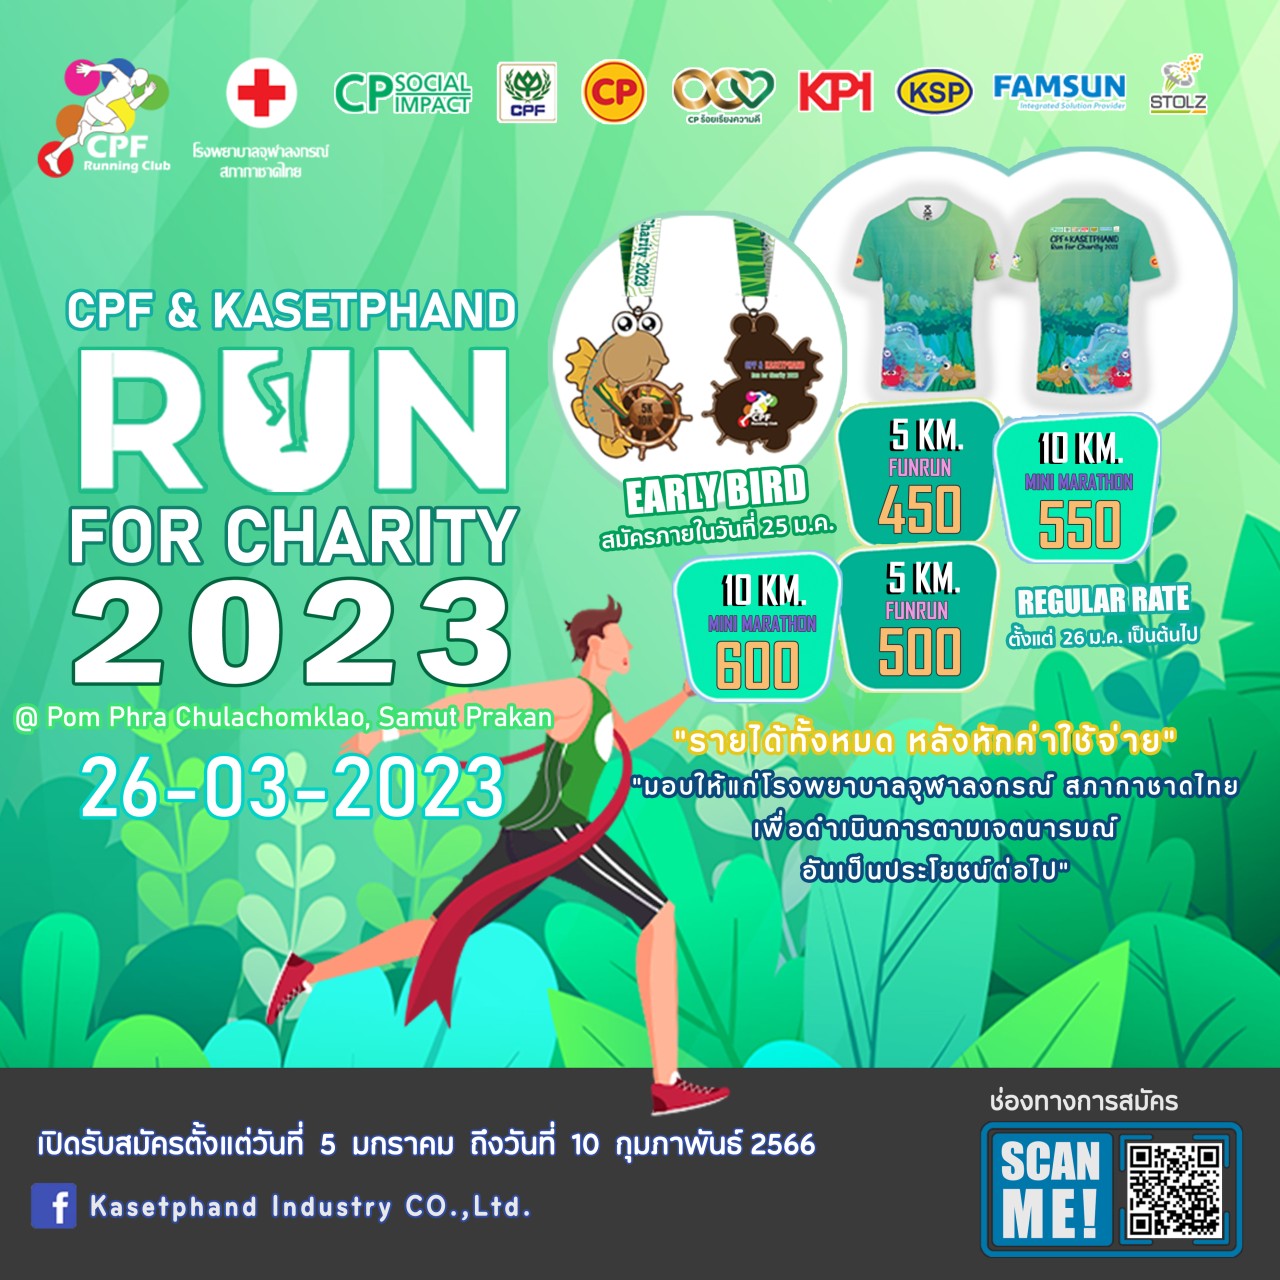 CPF & KASETPHAND Run for Charity 2023